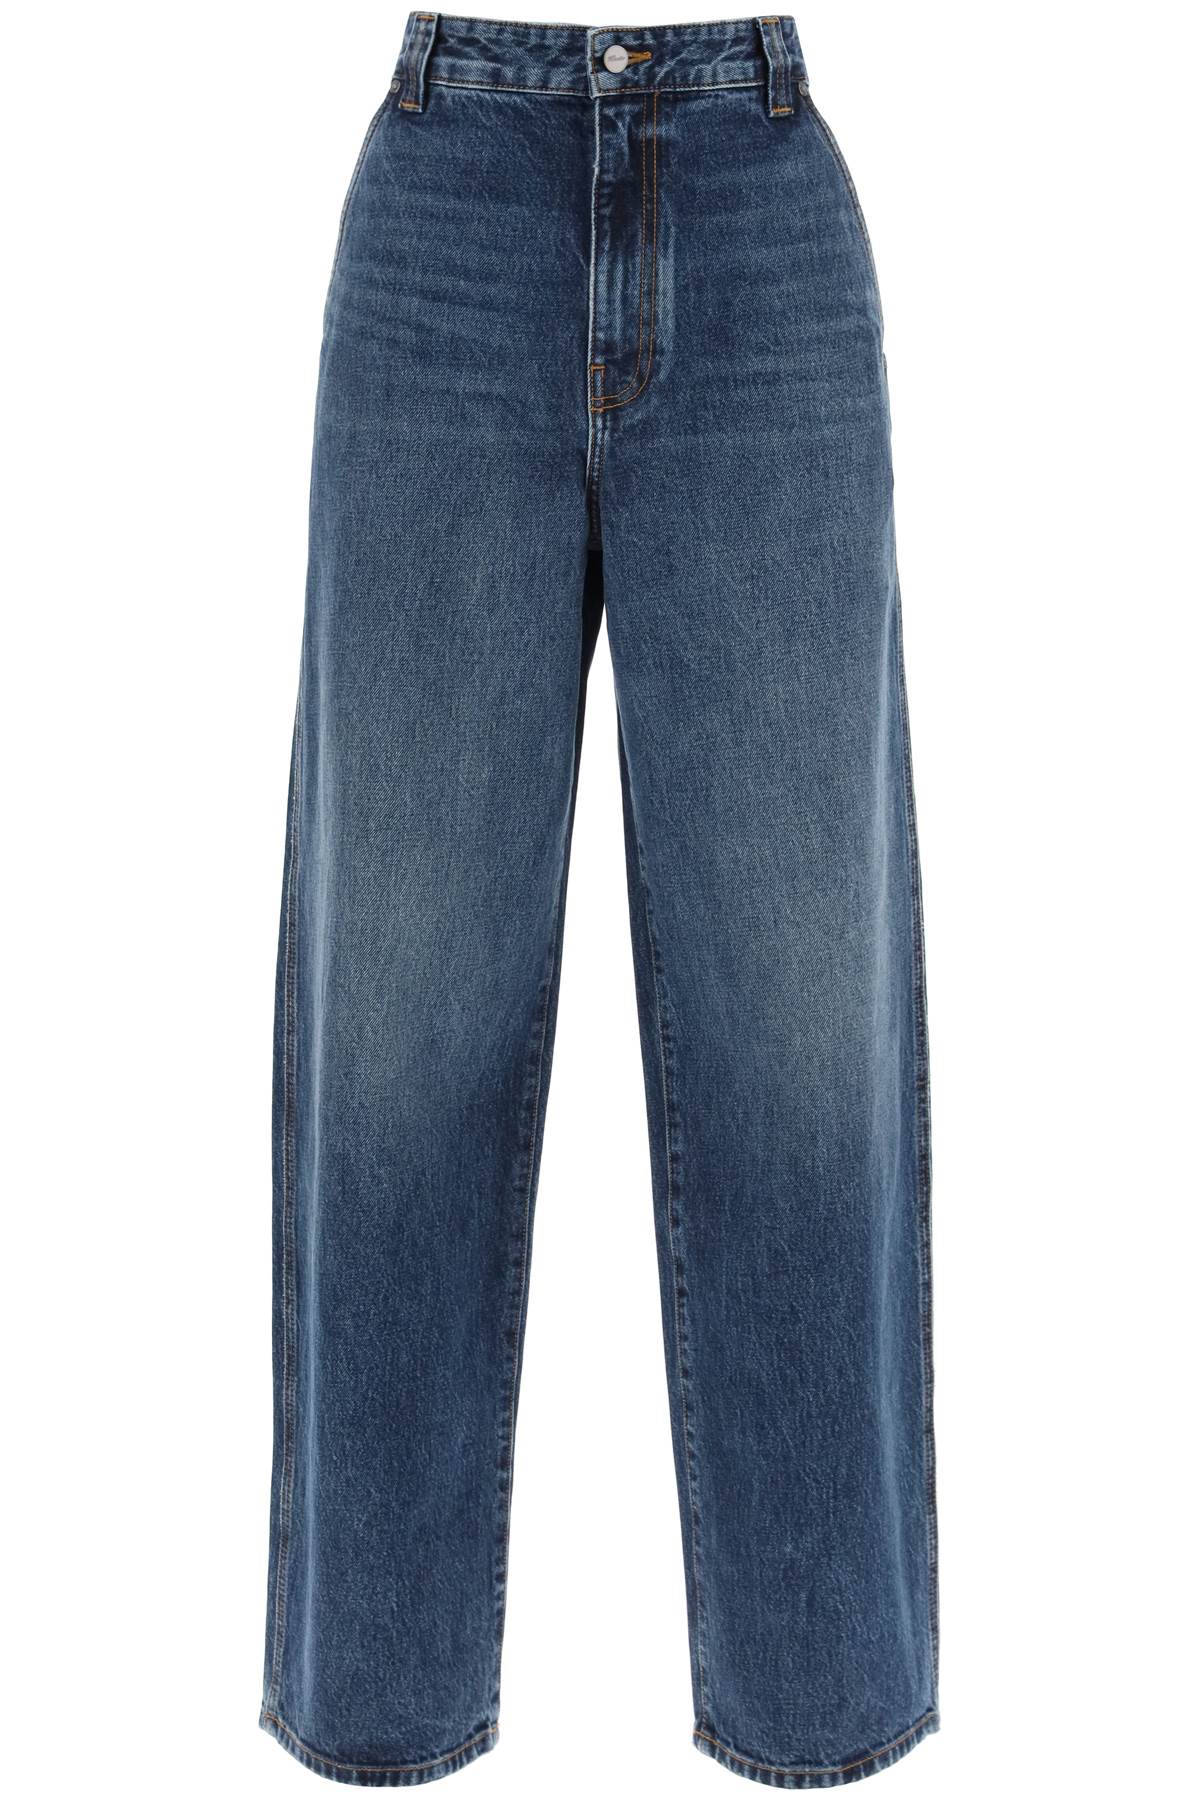 bacall Blue Cotton Jeans